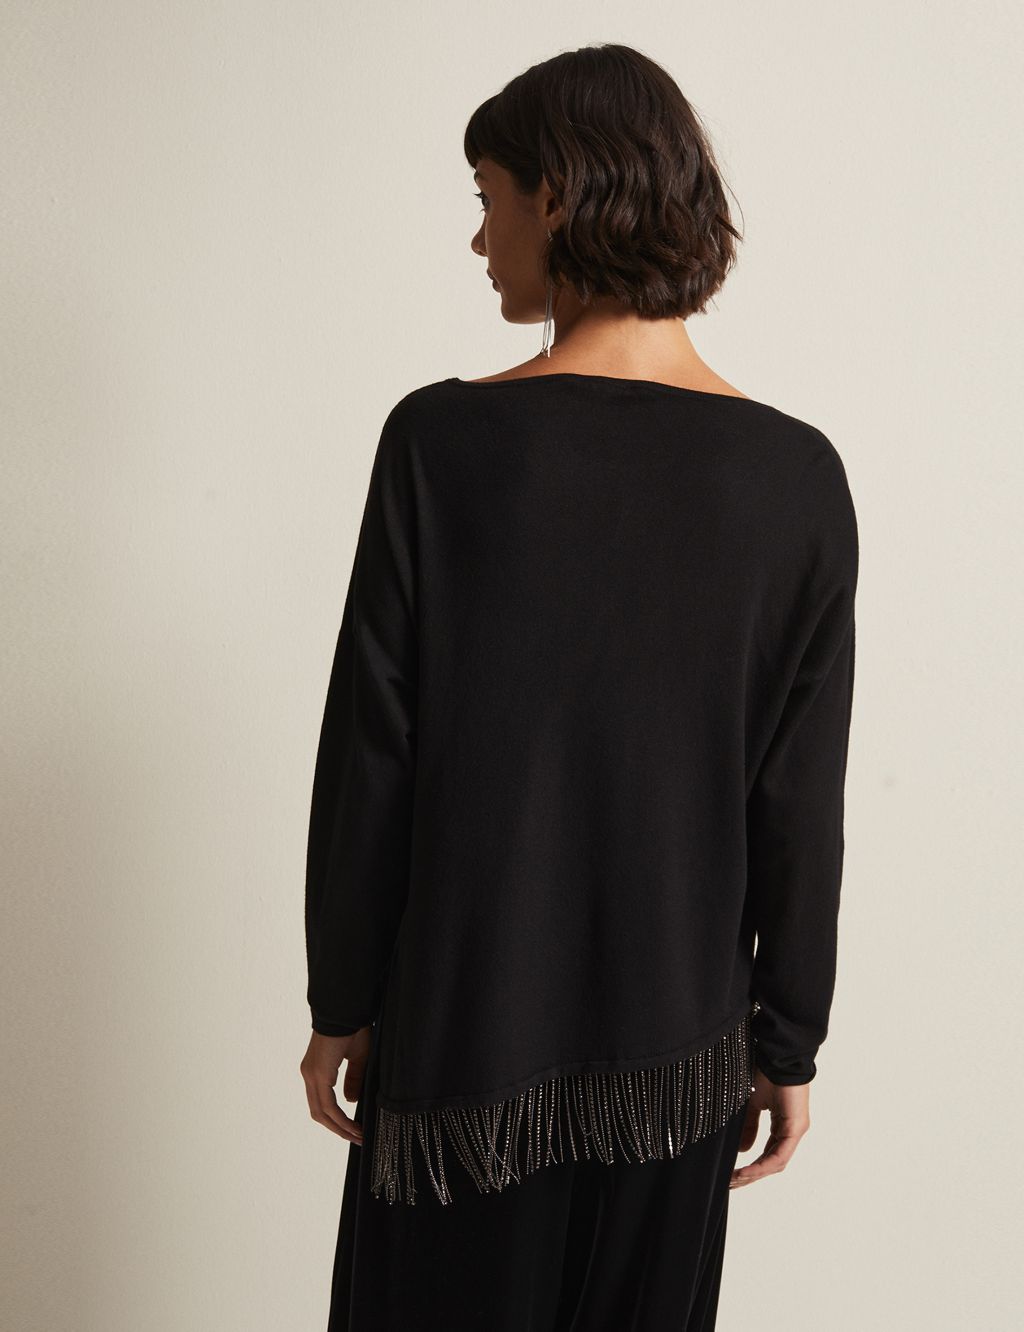 Embellished Slash Neck Knitted Top | Phase Eight | M&S